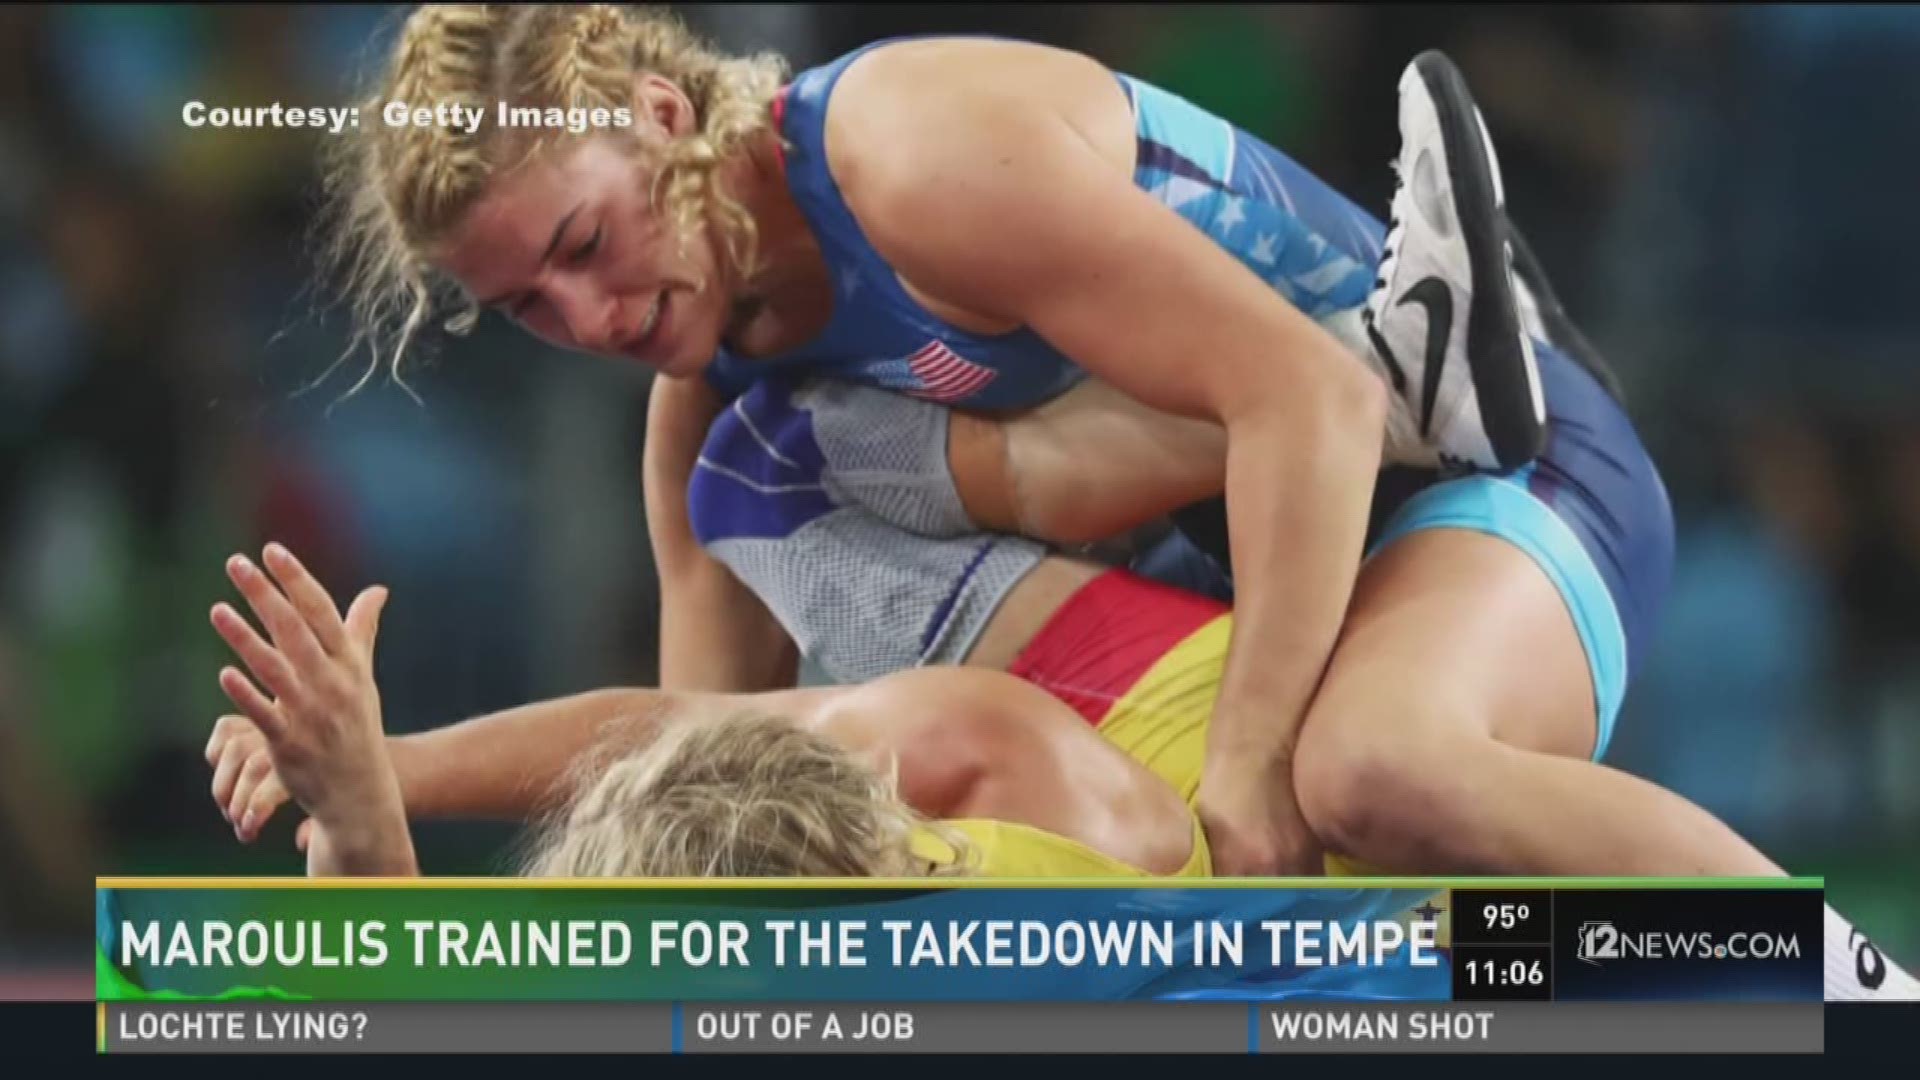 Helen Maroulis, first U.S. woman to win gold for wrestling